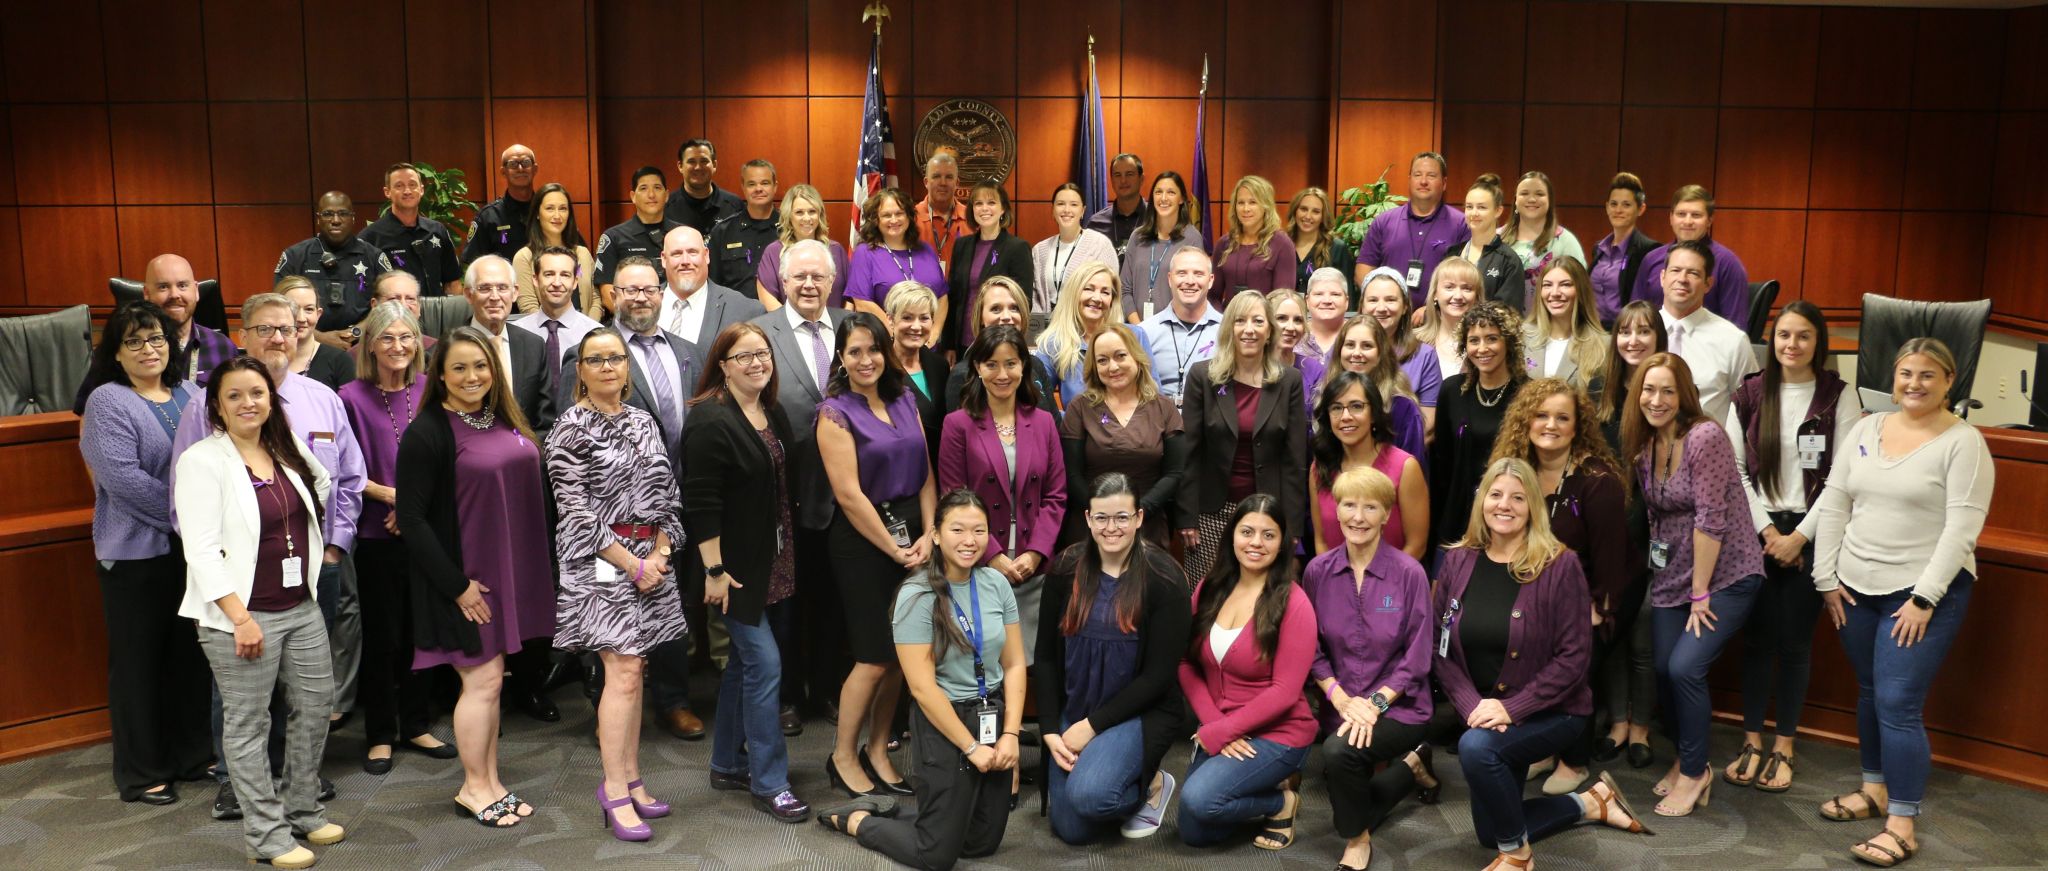 group of people supporting Domestic Violent awareness month by wearing purple